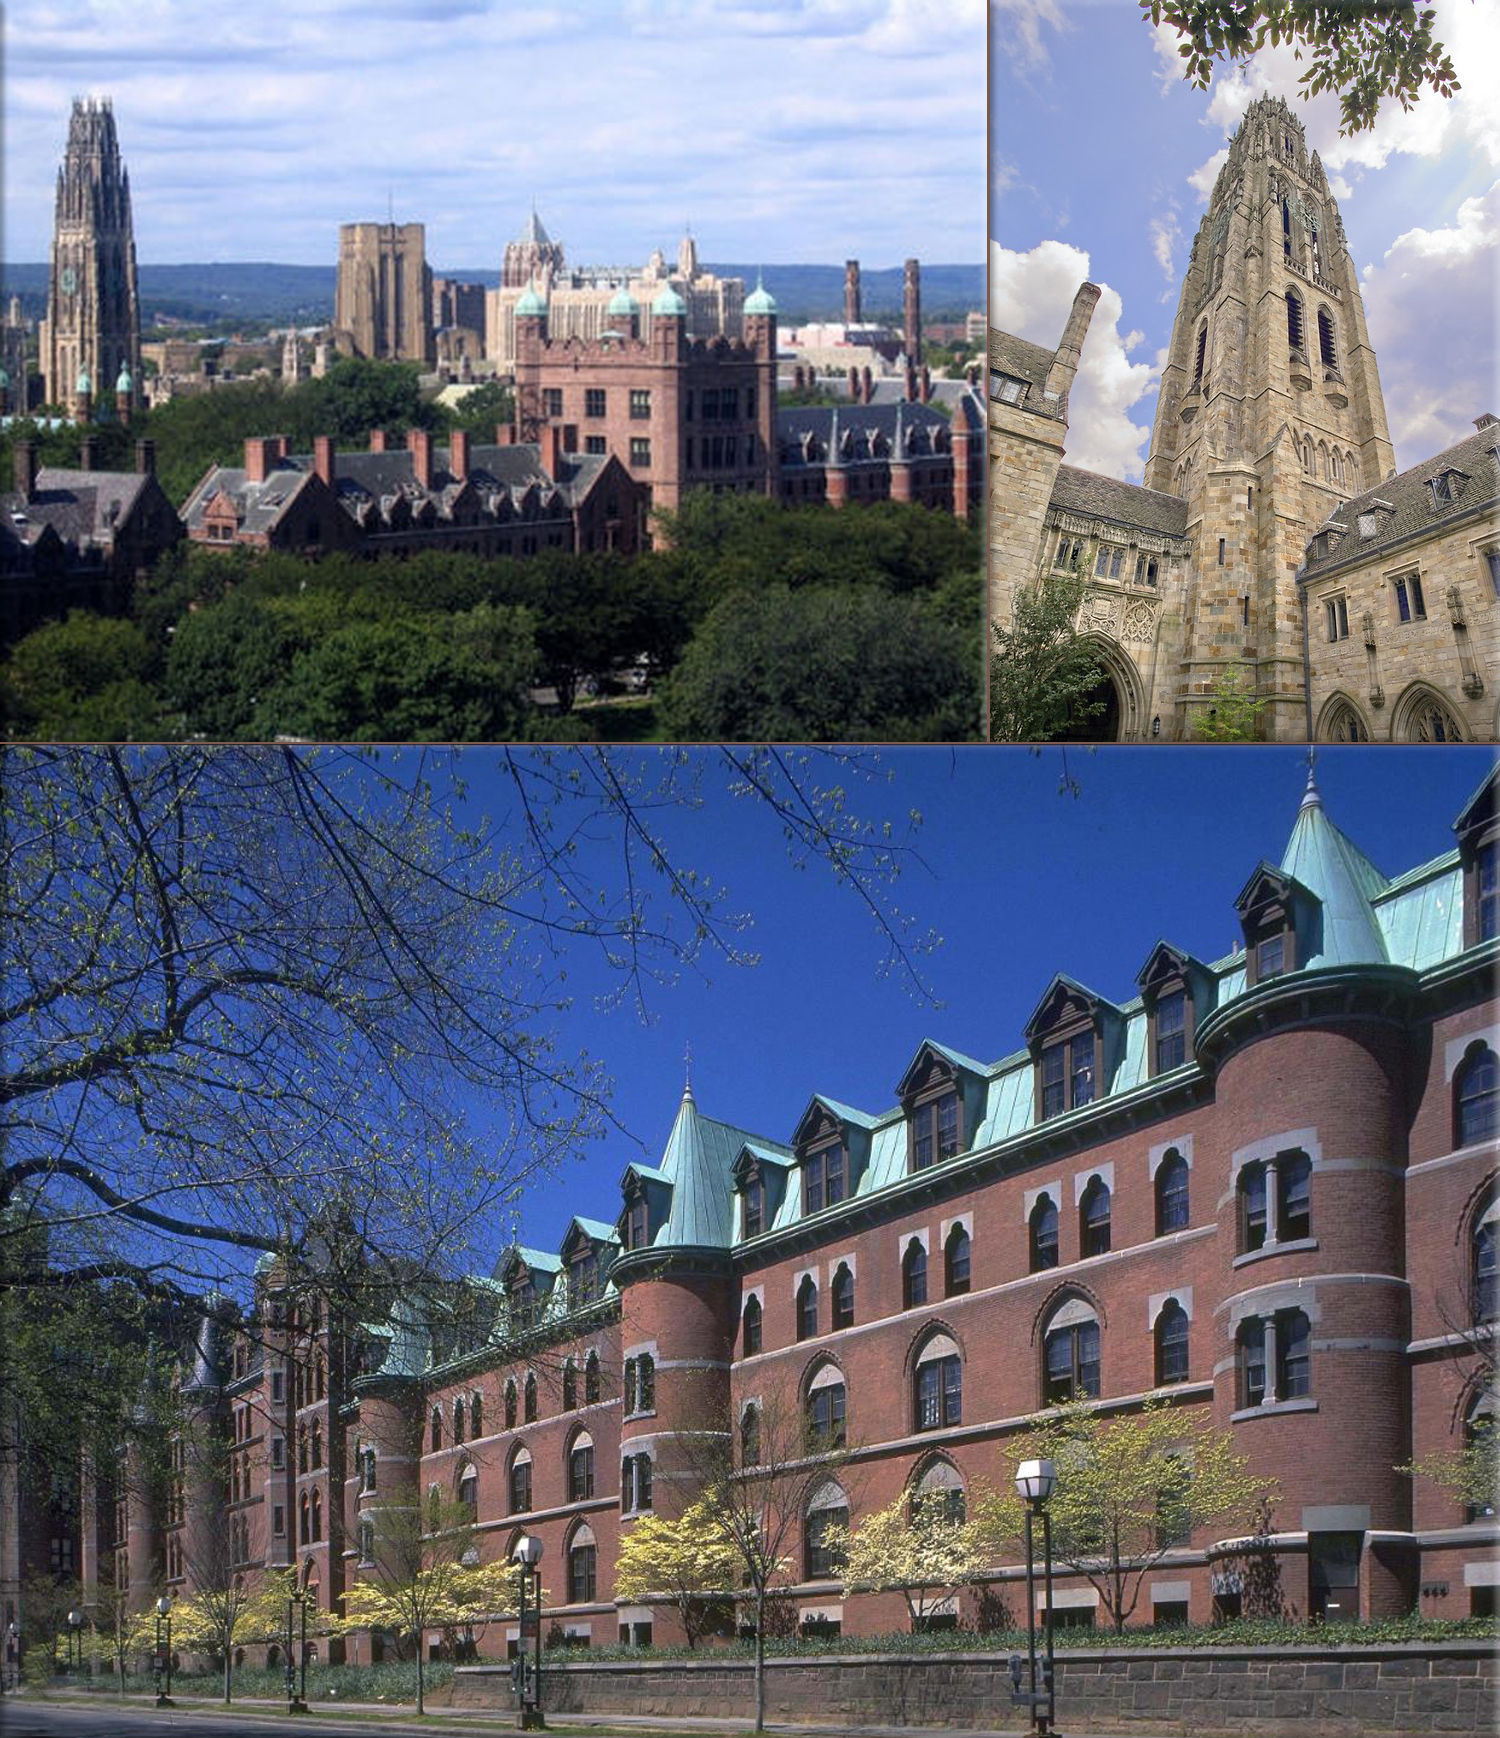 The Collegiate School of Connecticut (later renamed Yale University) is chartered in Old Saybrook, Connecticut